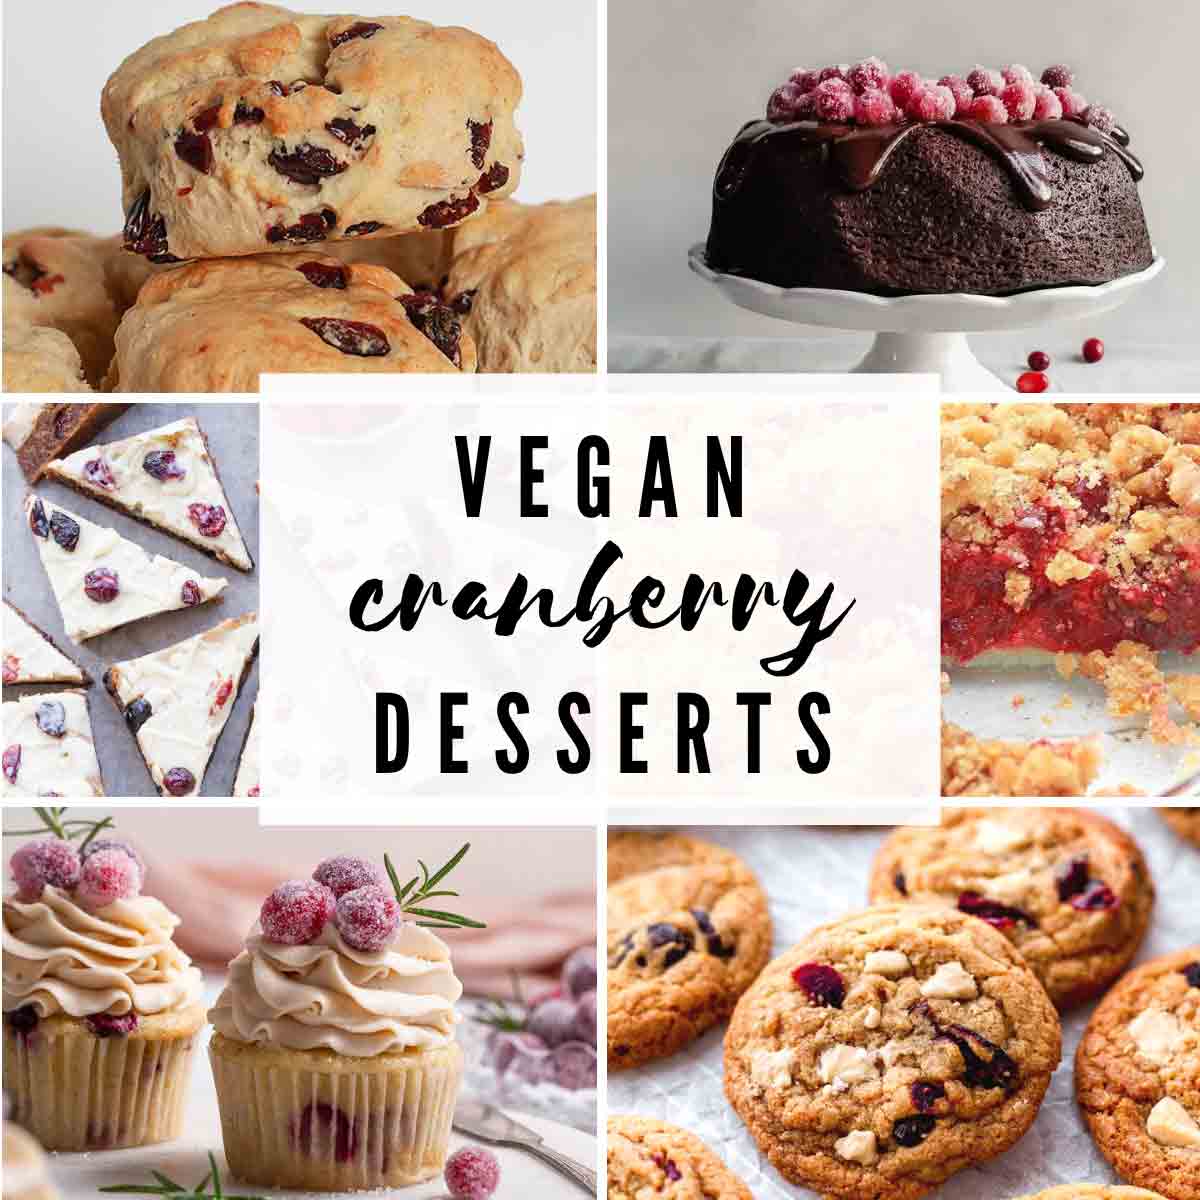 Vegan Cranberry Desserts Image Collage With Text Overlay